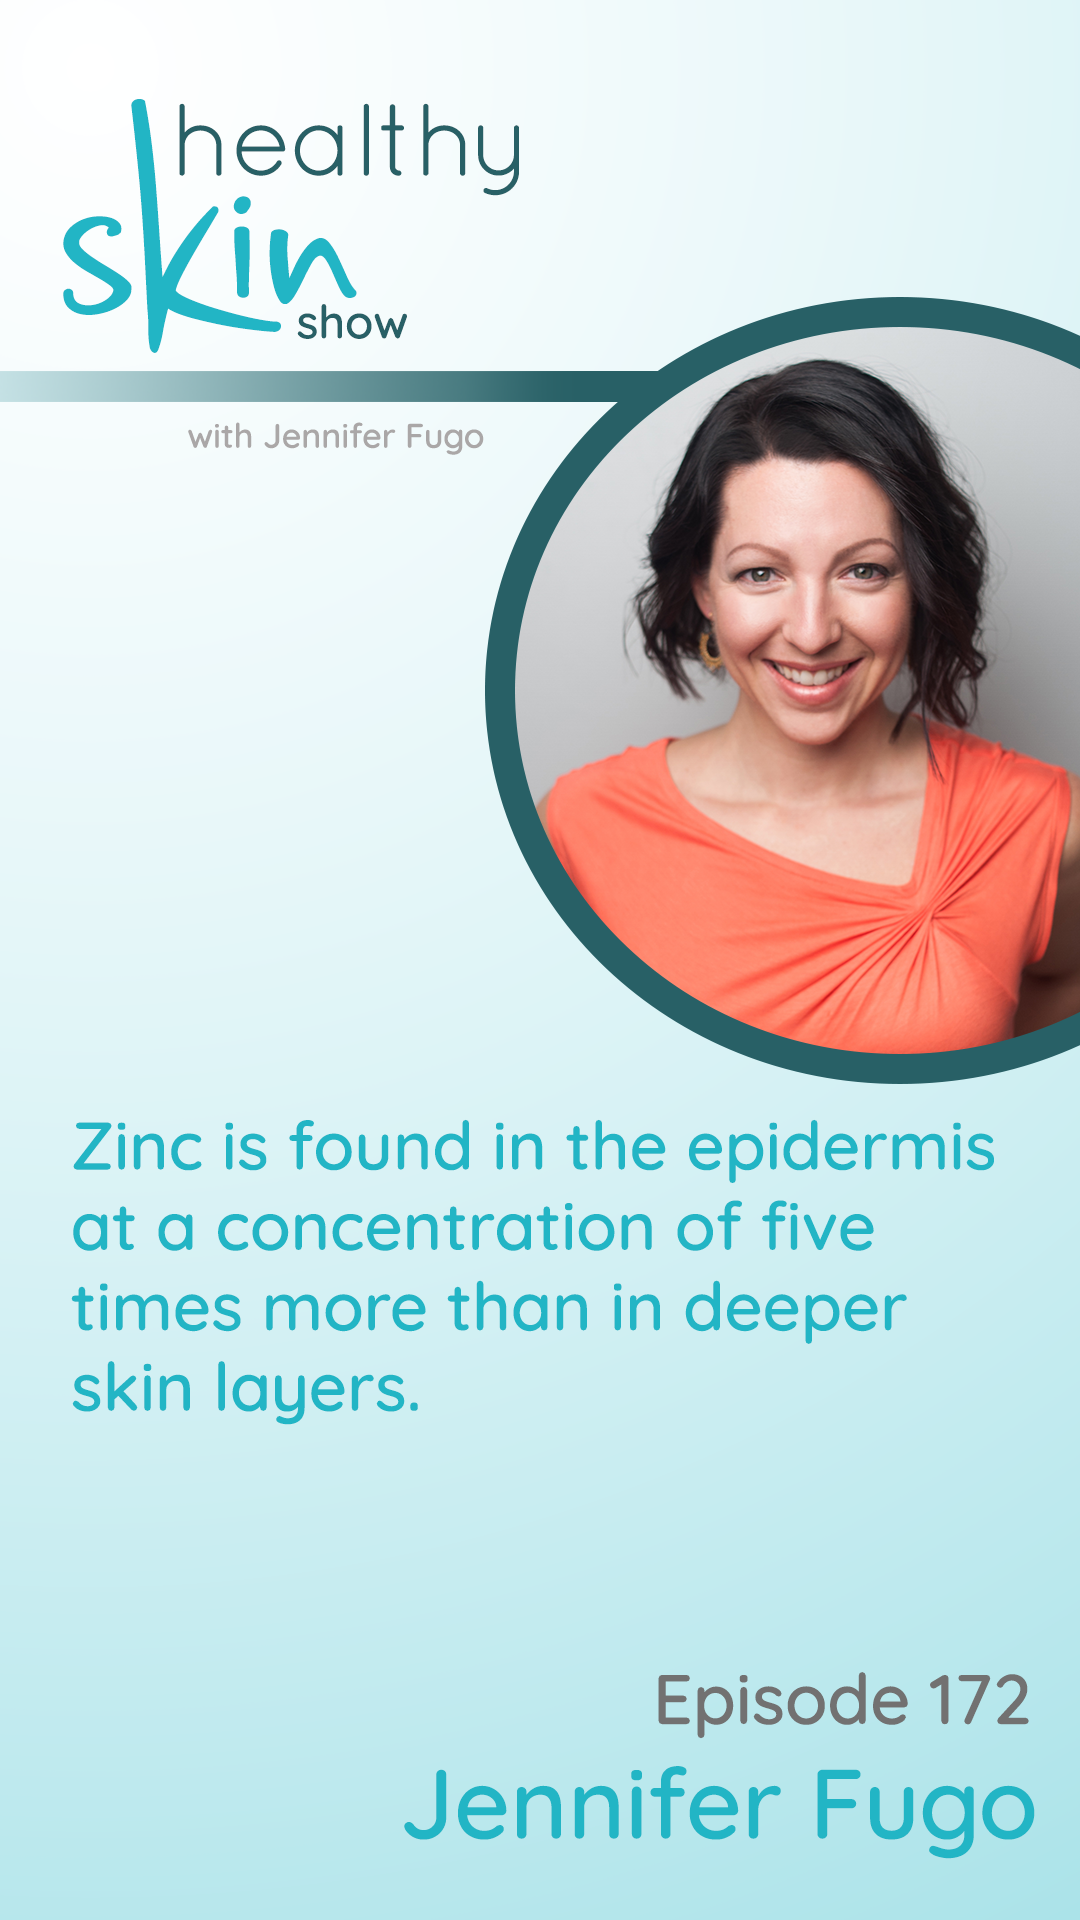 Zinc is found in the epidermis at a concentration of five times more than in deeper skin layers.